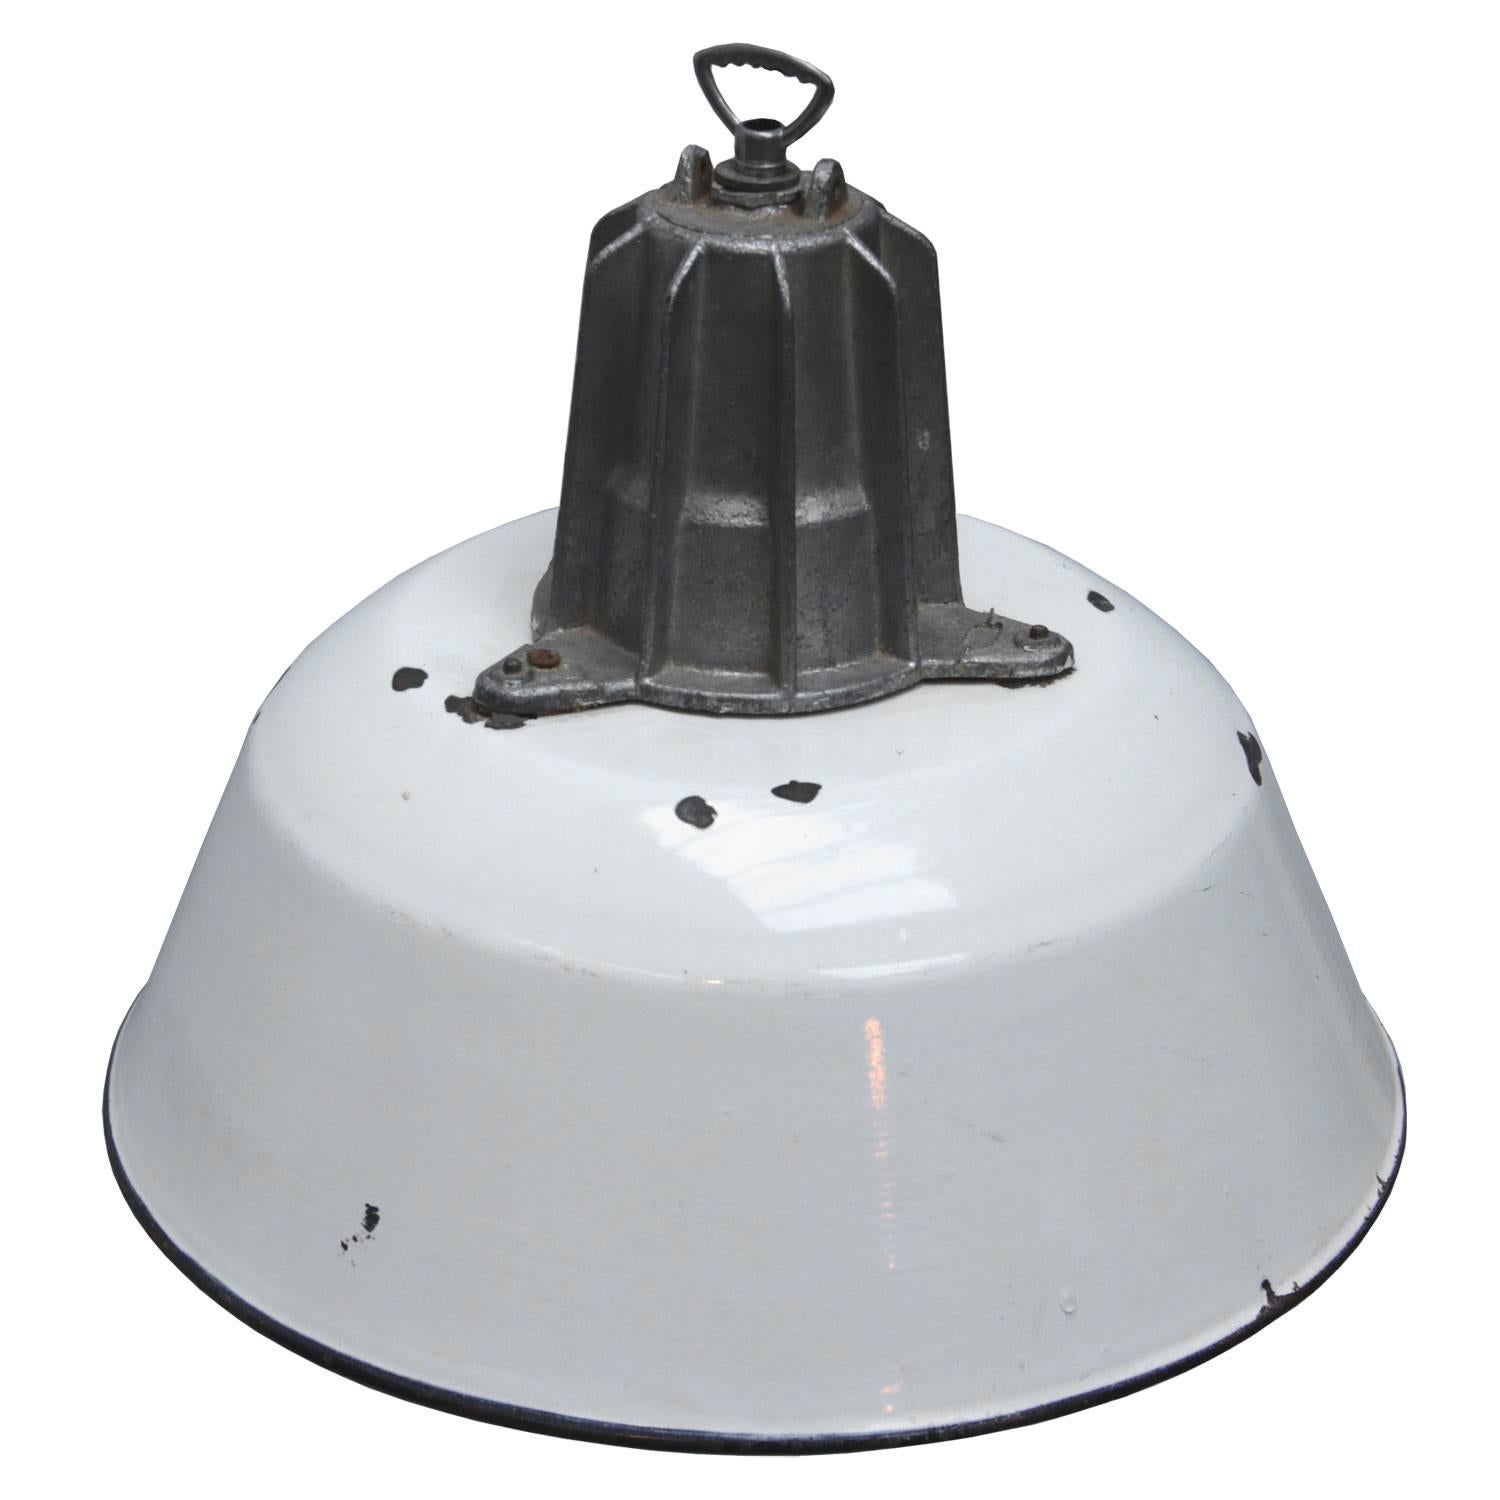 Industrial hanging lamp. White enamel. White interior.
Cast aluminium top.

Weight: 2.0 kg / 4.4 lb

All lamps have been made suitable by international standards for incandescent light bulbs, energy-efficient and LED bulbs. E26/E27 bulb holders and